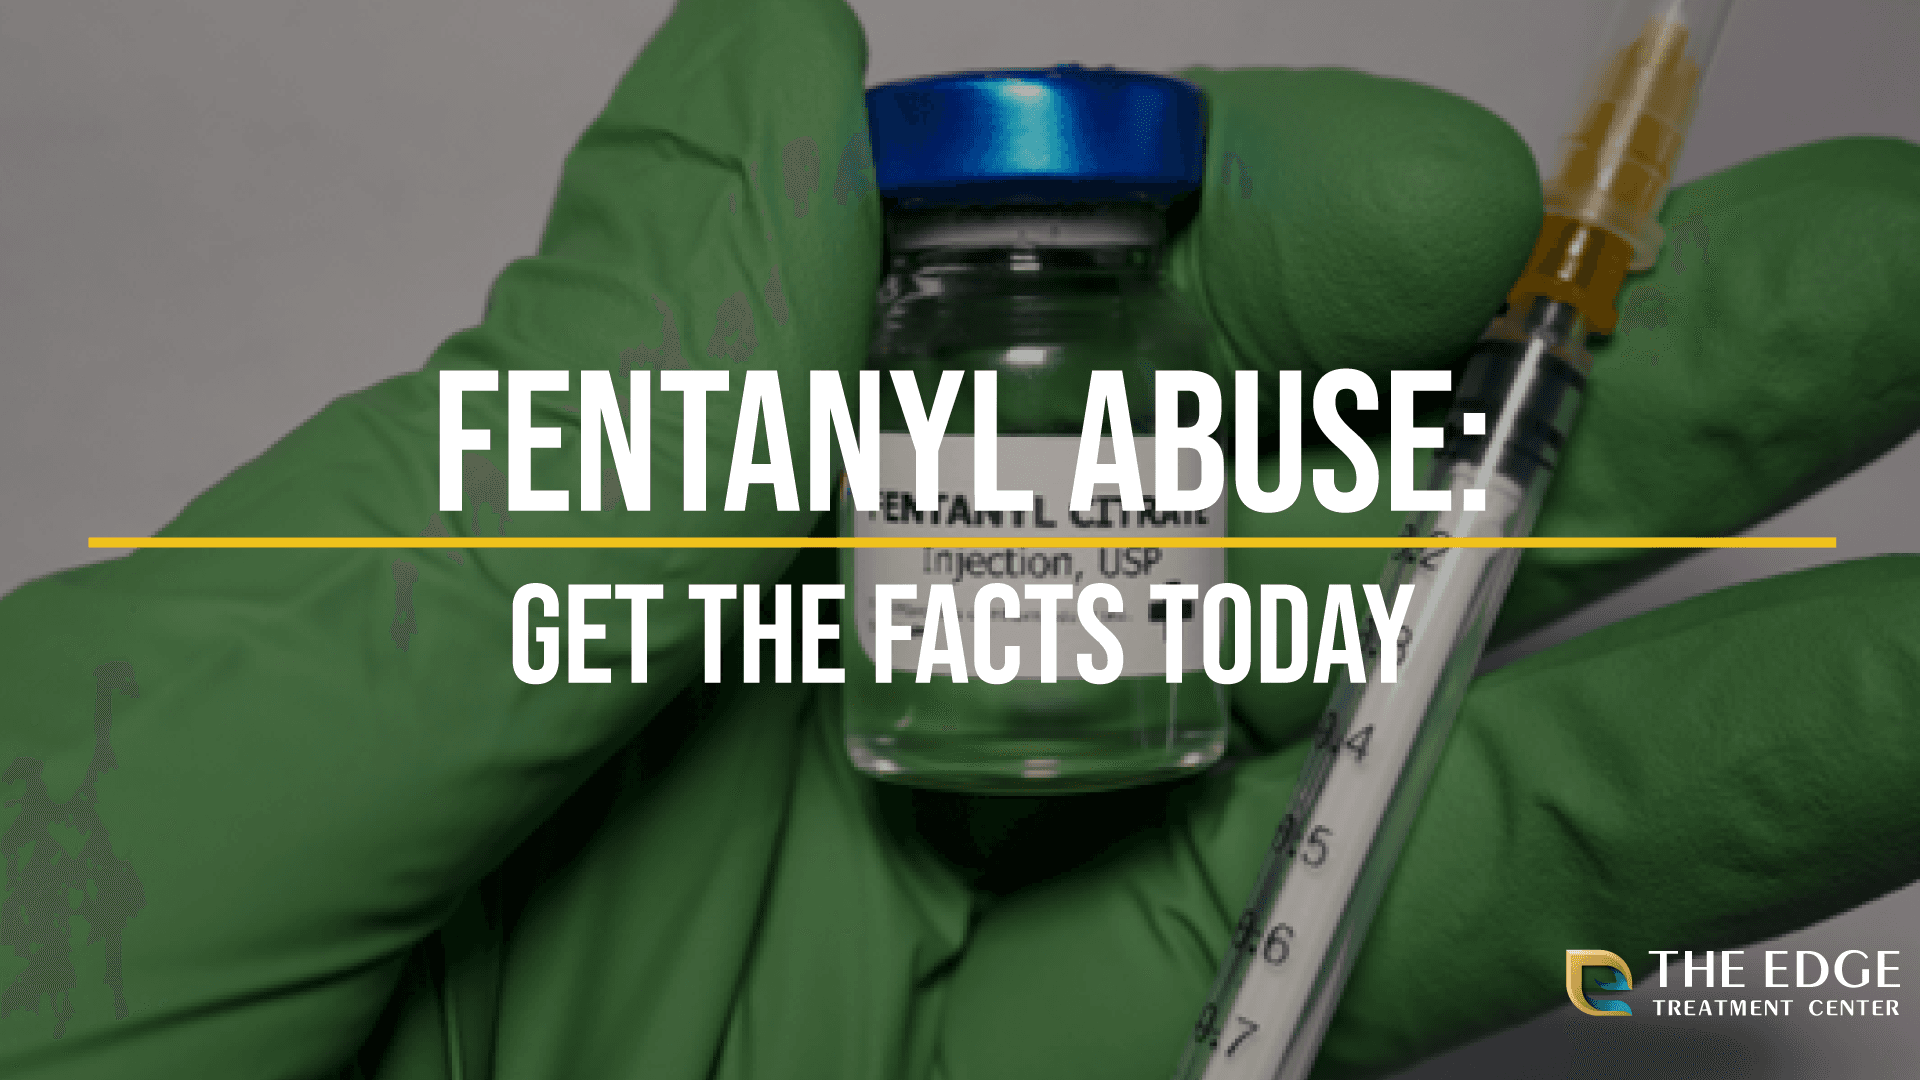 Fentanyl Abuse: The Facts About This Lethal Form of Opioid Abuse